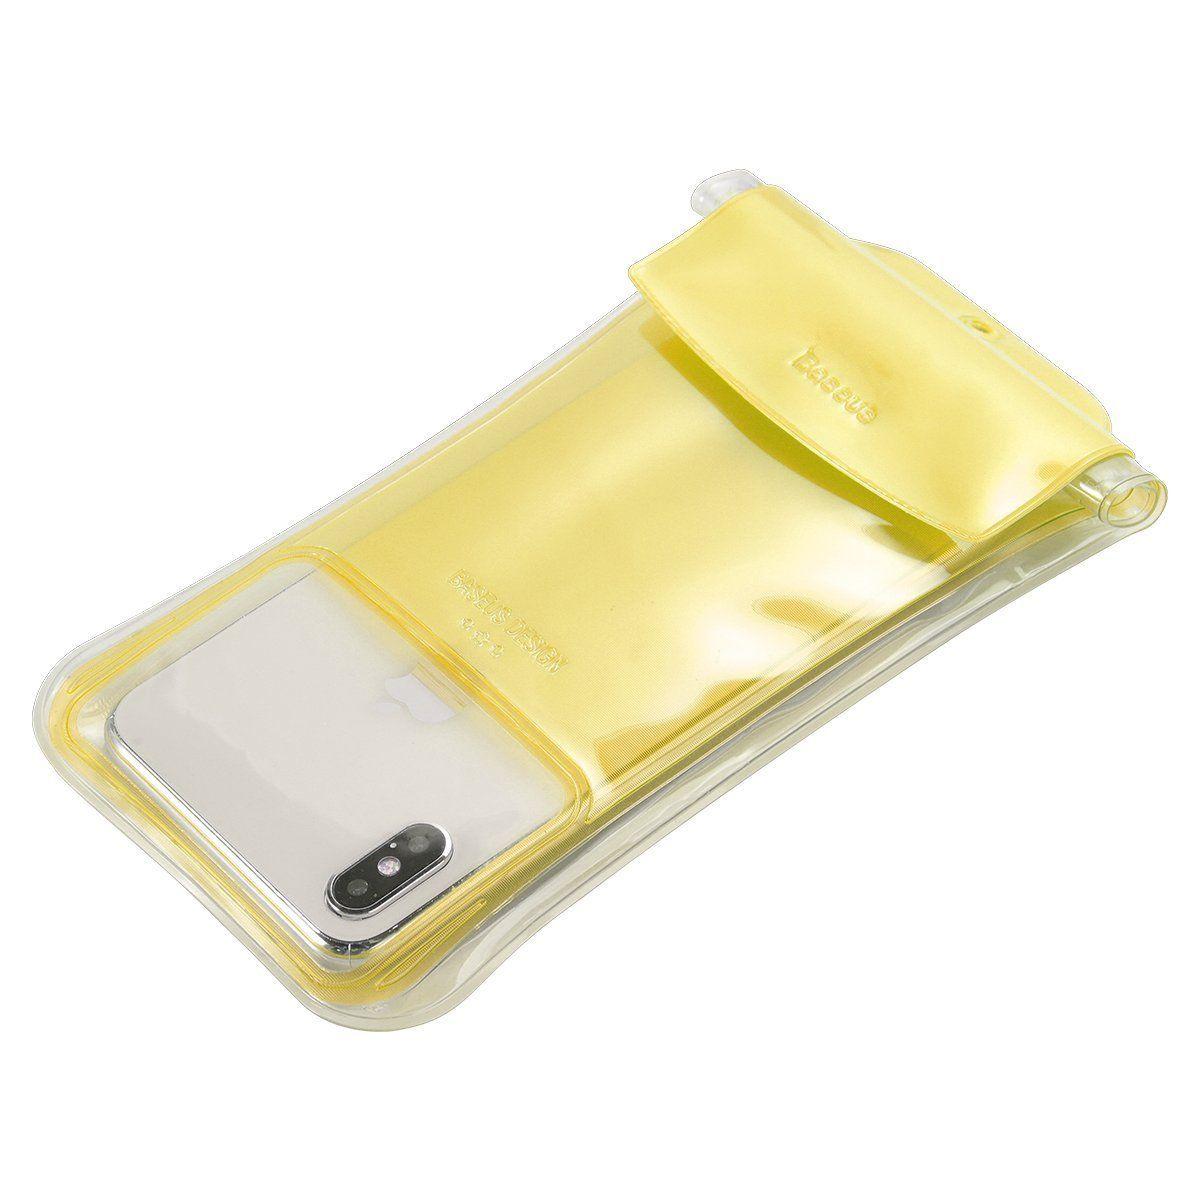 Baseus Safe Airbag universal waterproof case for smartphones yellow (ACFSD-C0Y)